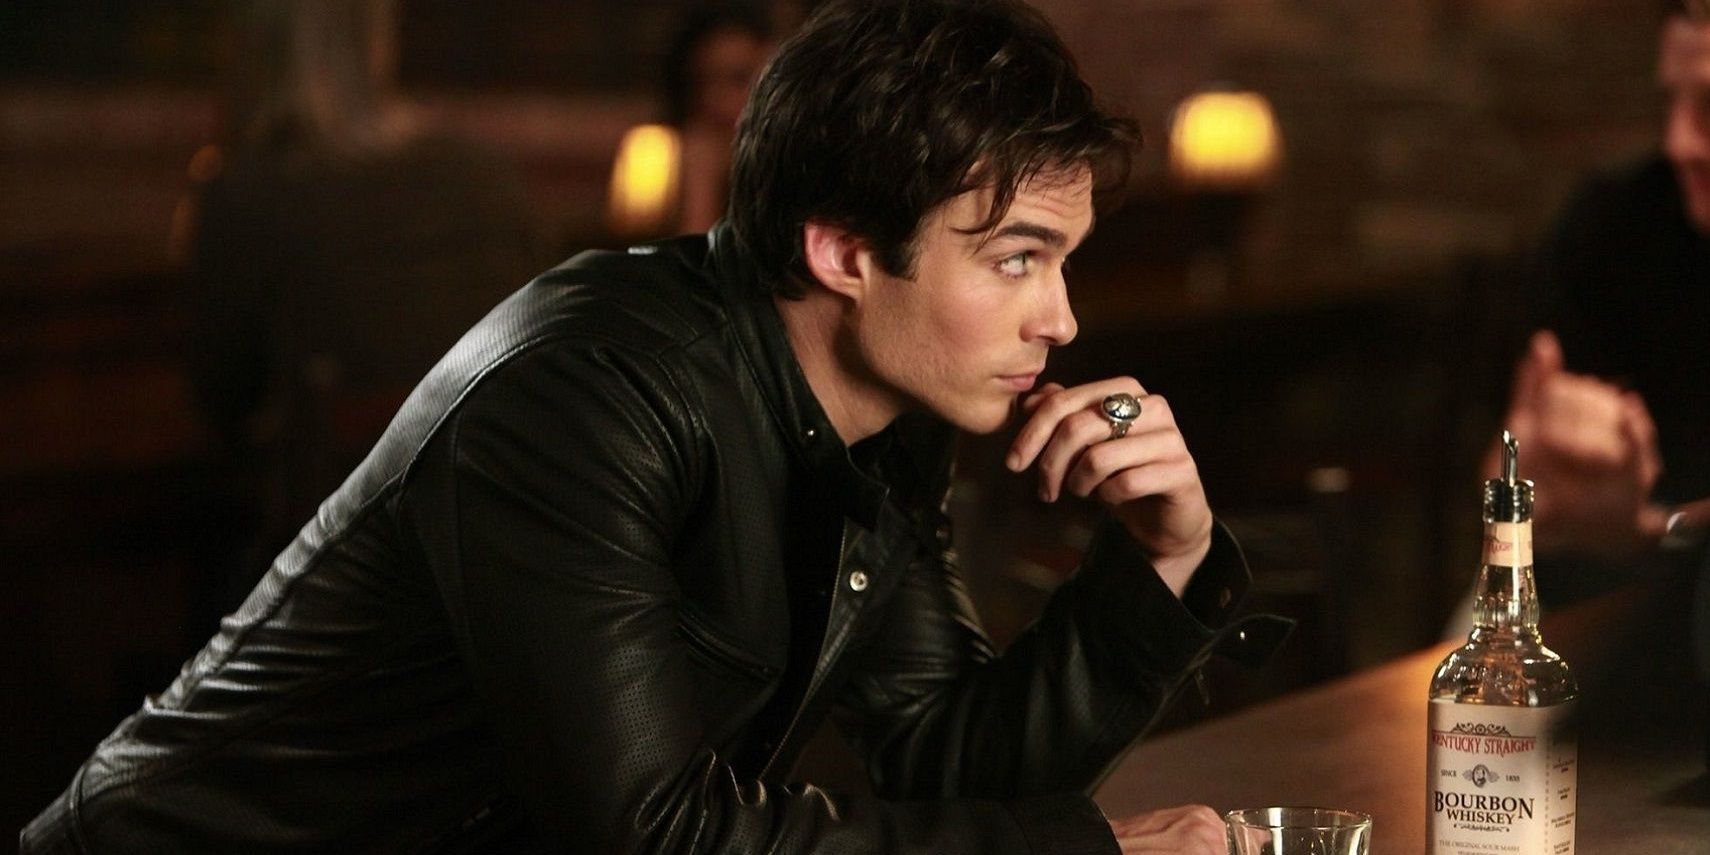 Damon at a bar looking to the distance in TVD